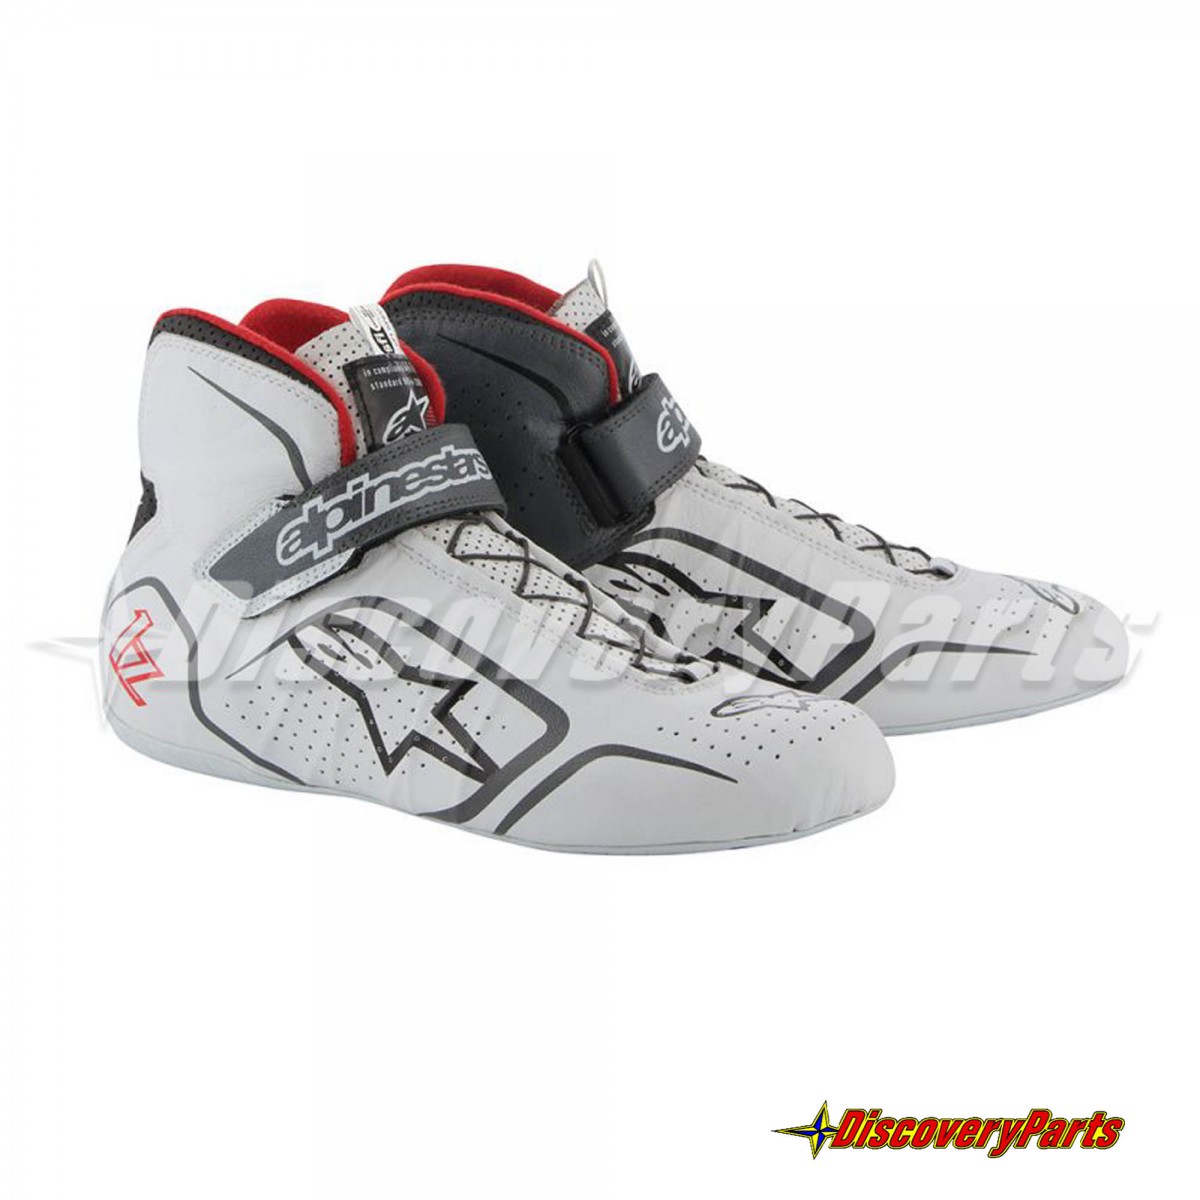 Auto Racing Shoes - fasrparent